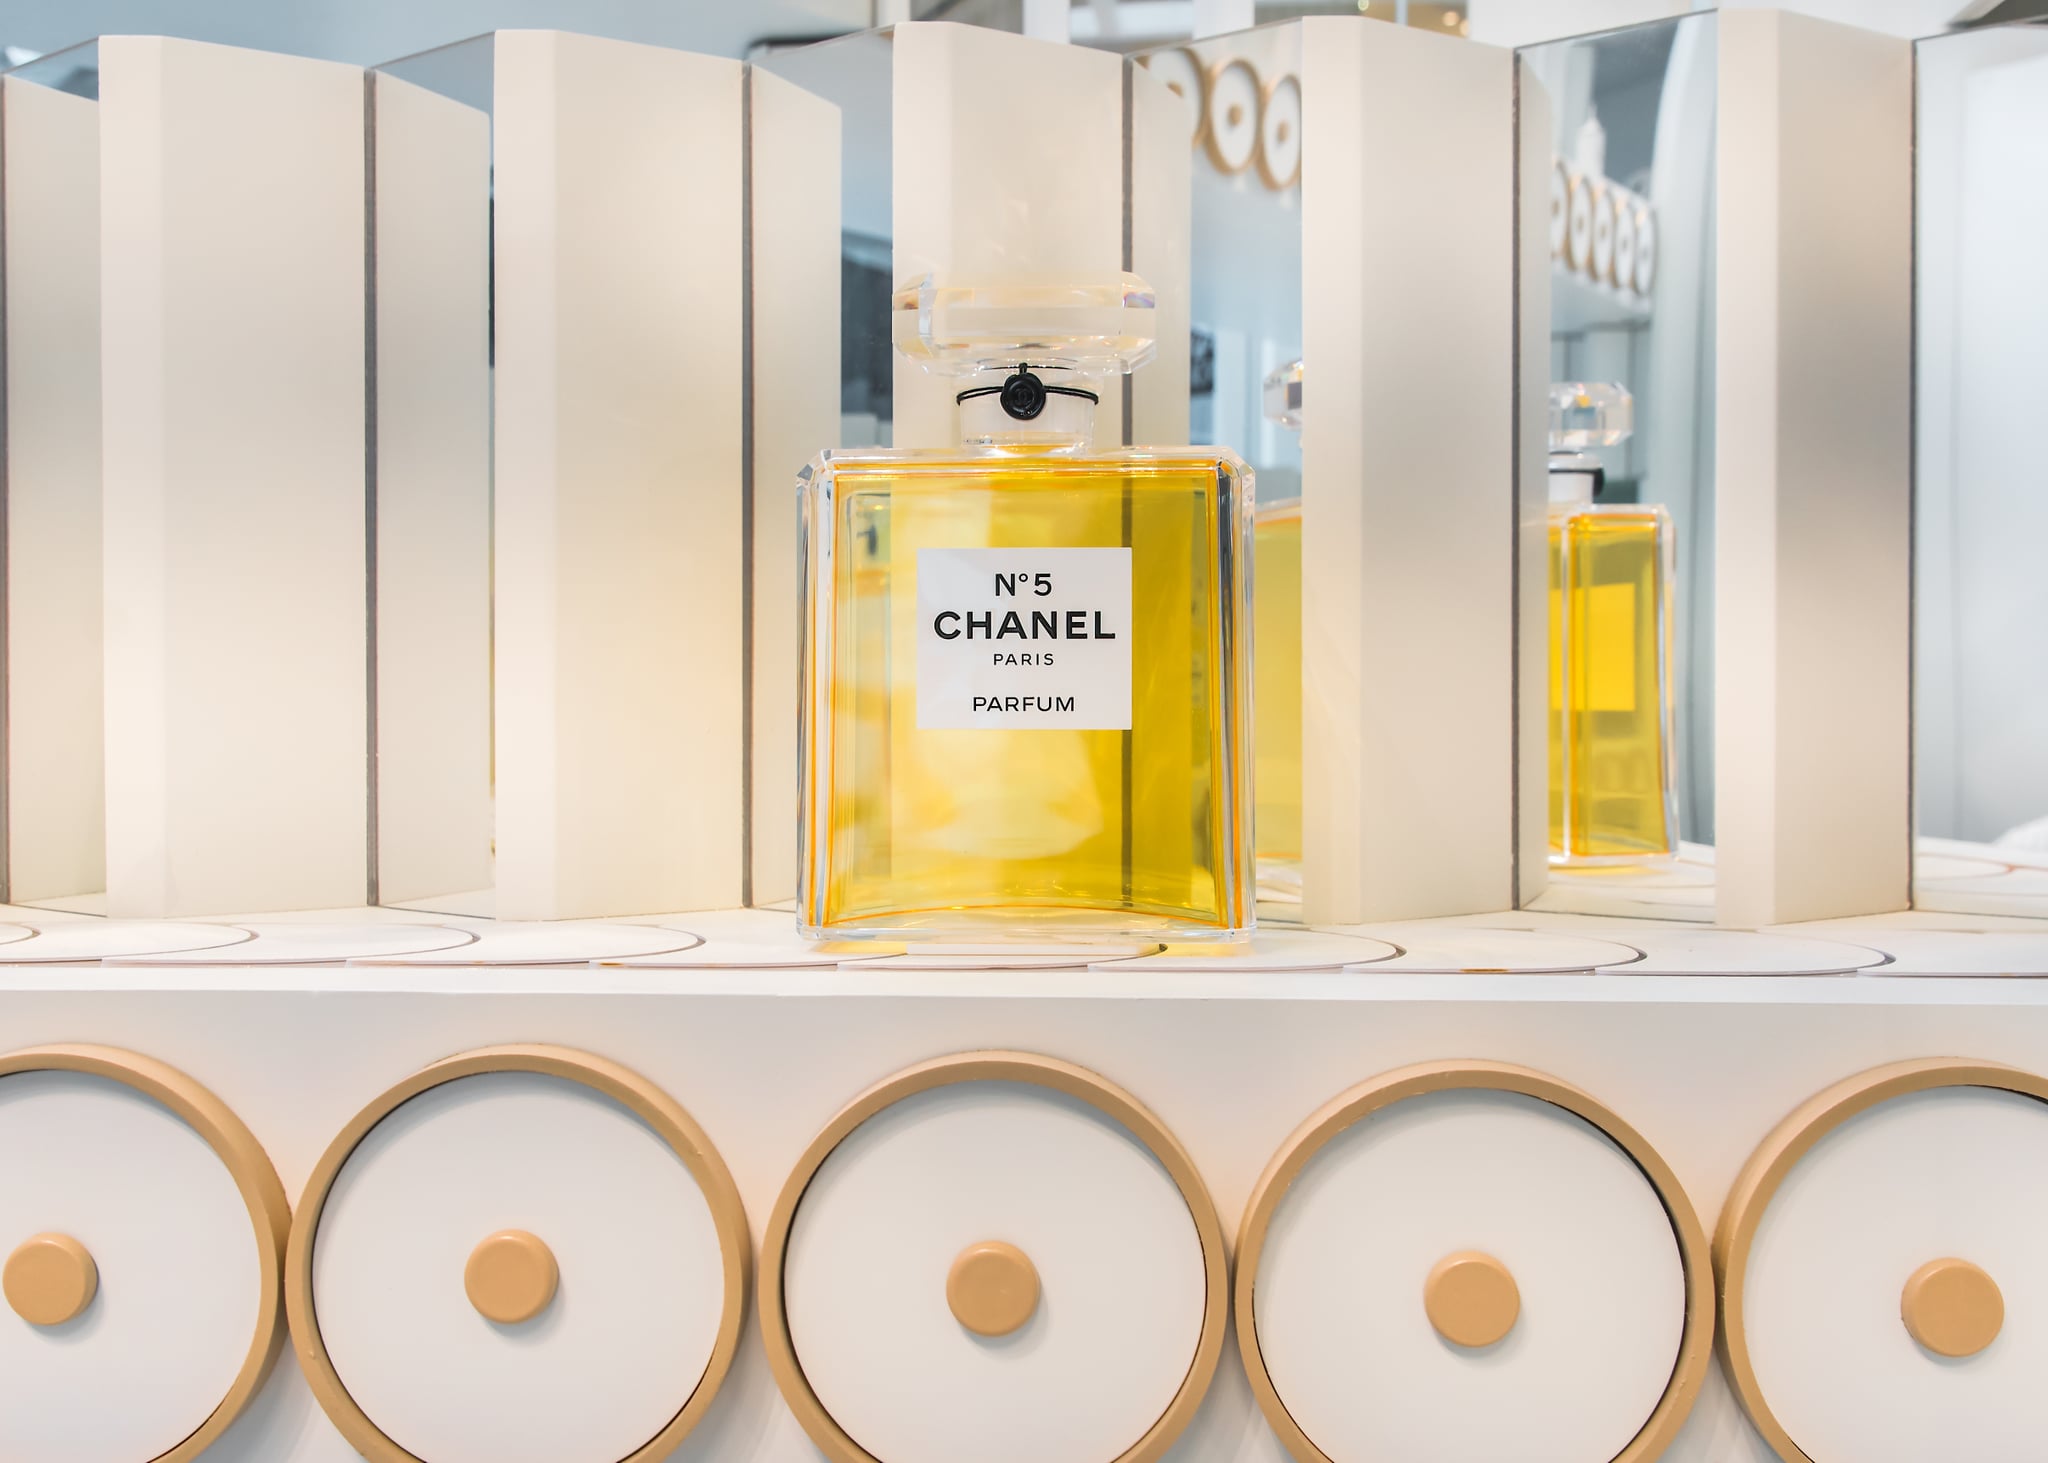 Chanel Celebrates No. 5 Fragrance With London Pop-Up Store